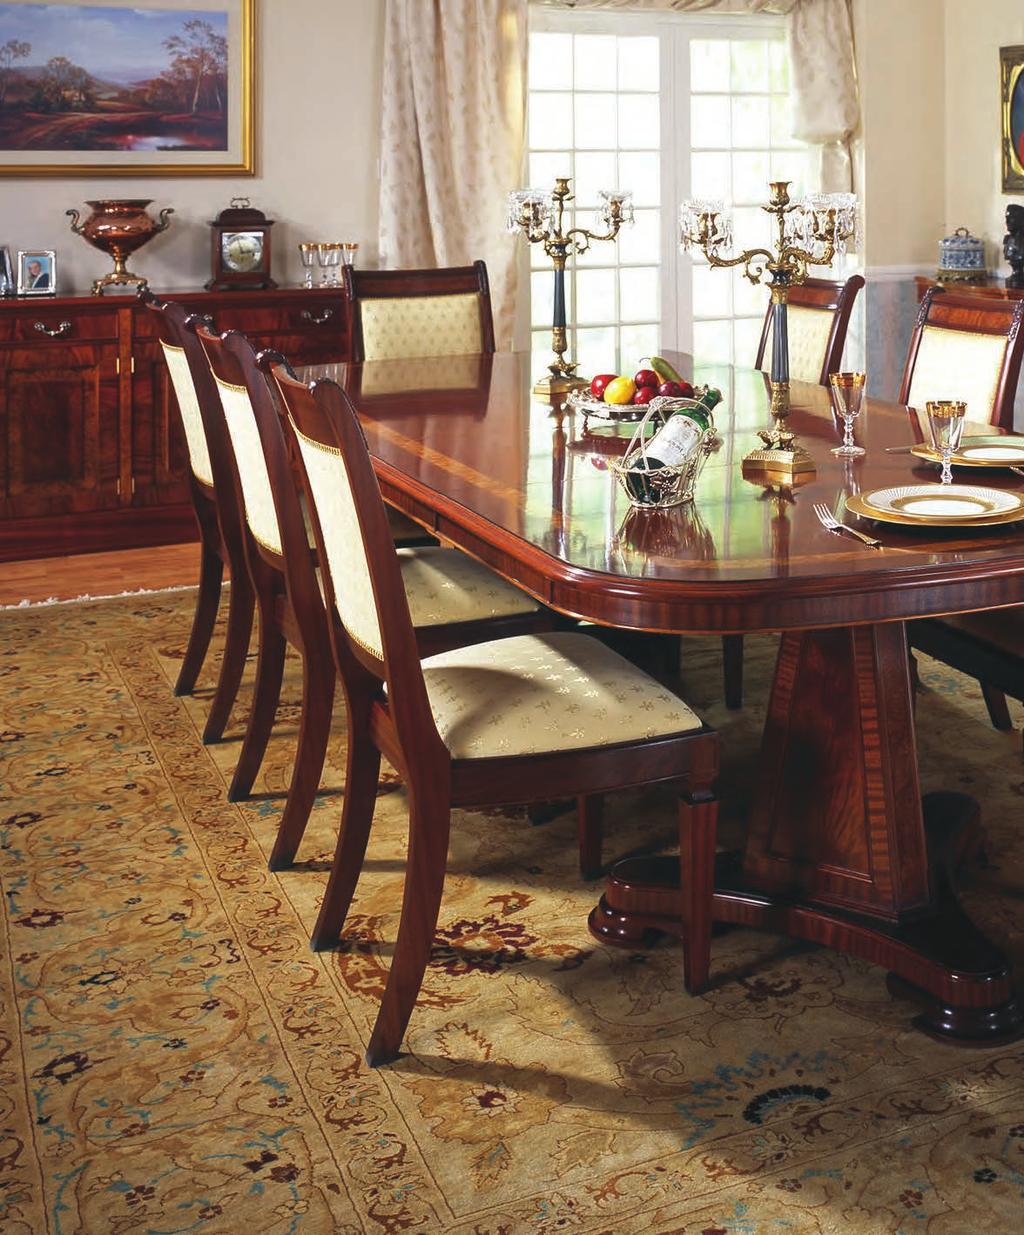 Grandeur As the name implies our Grandeur collection of furniture is the epitome of quality and decoration.